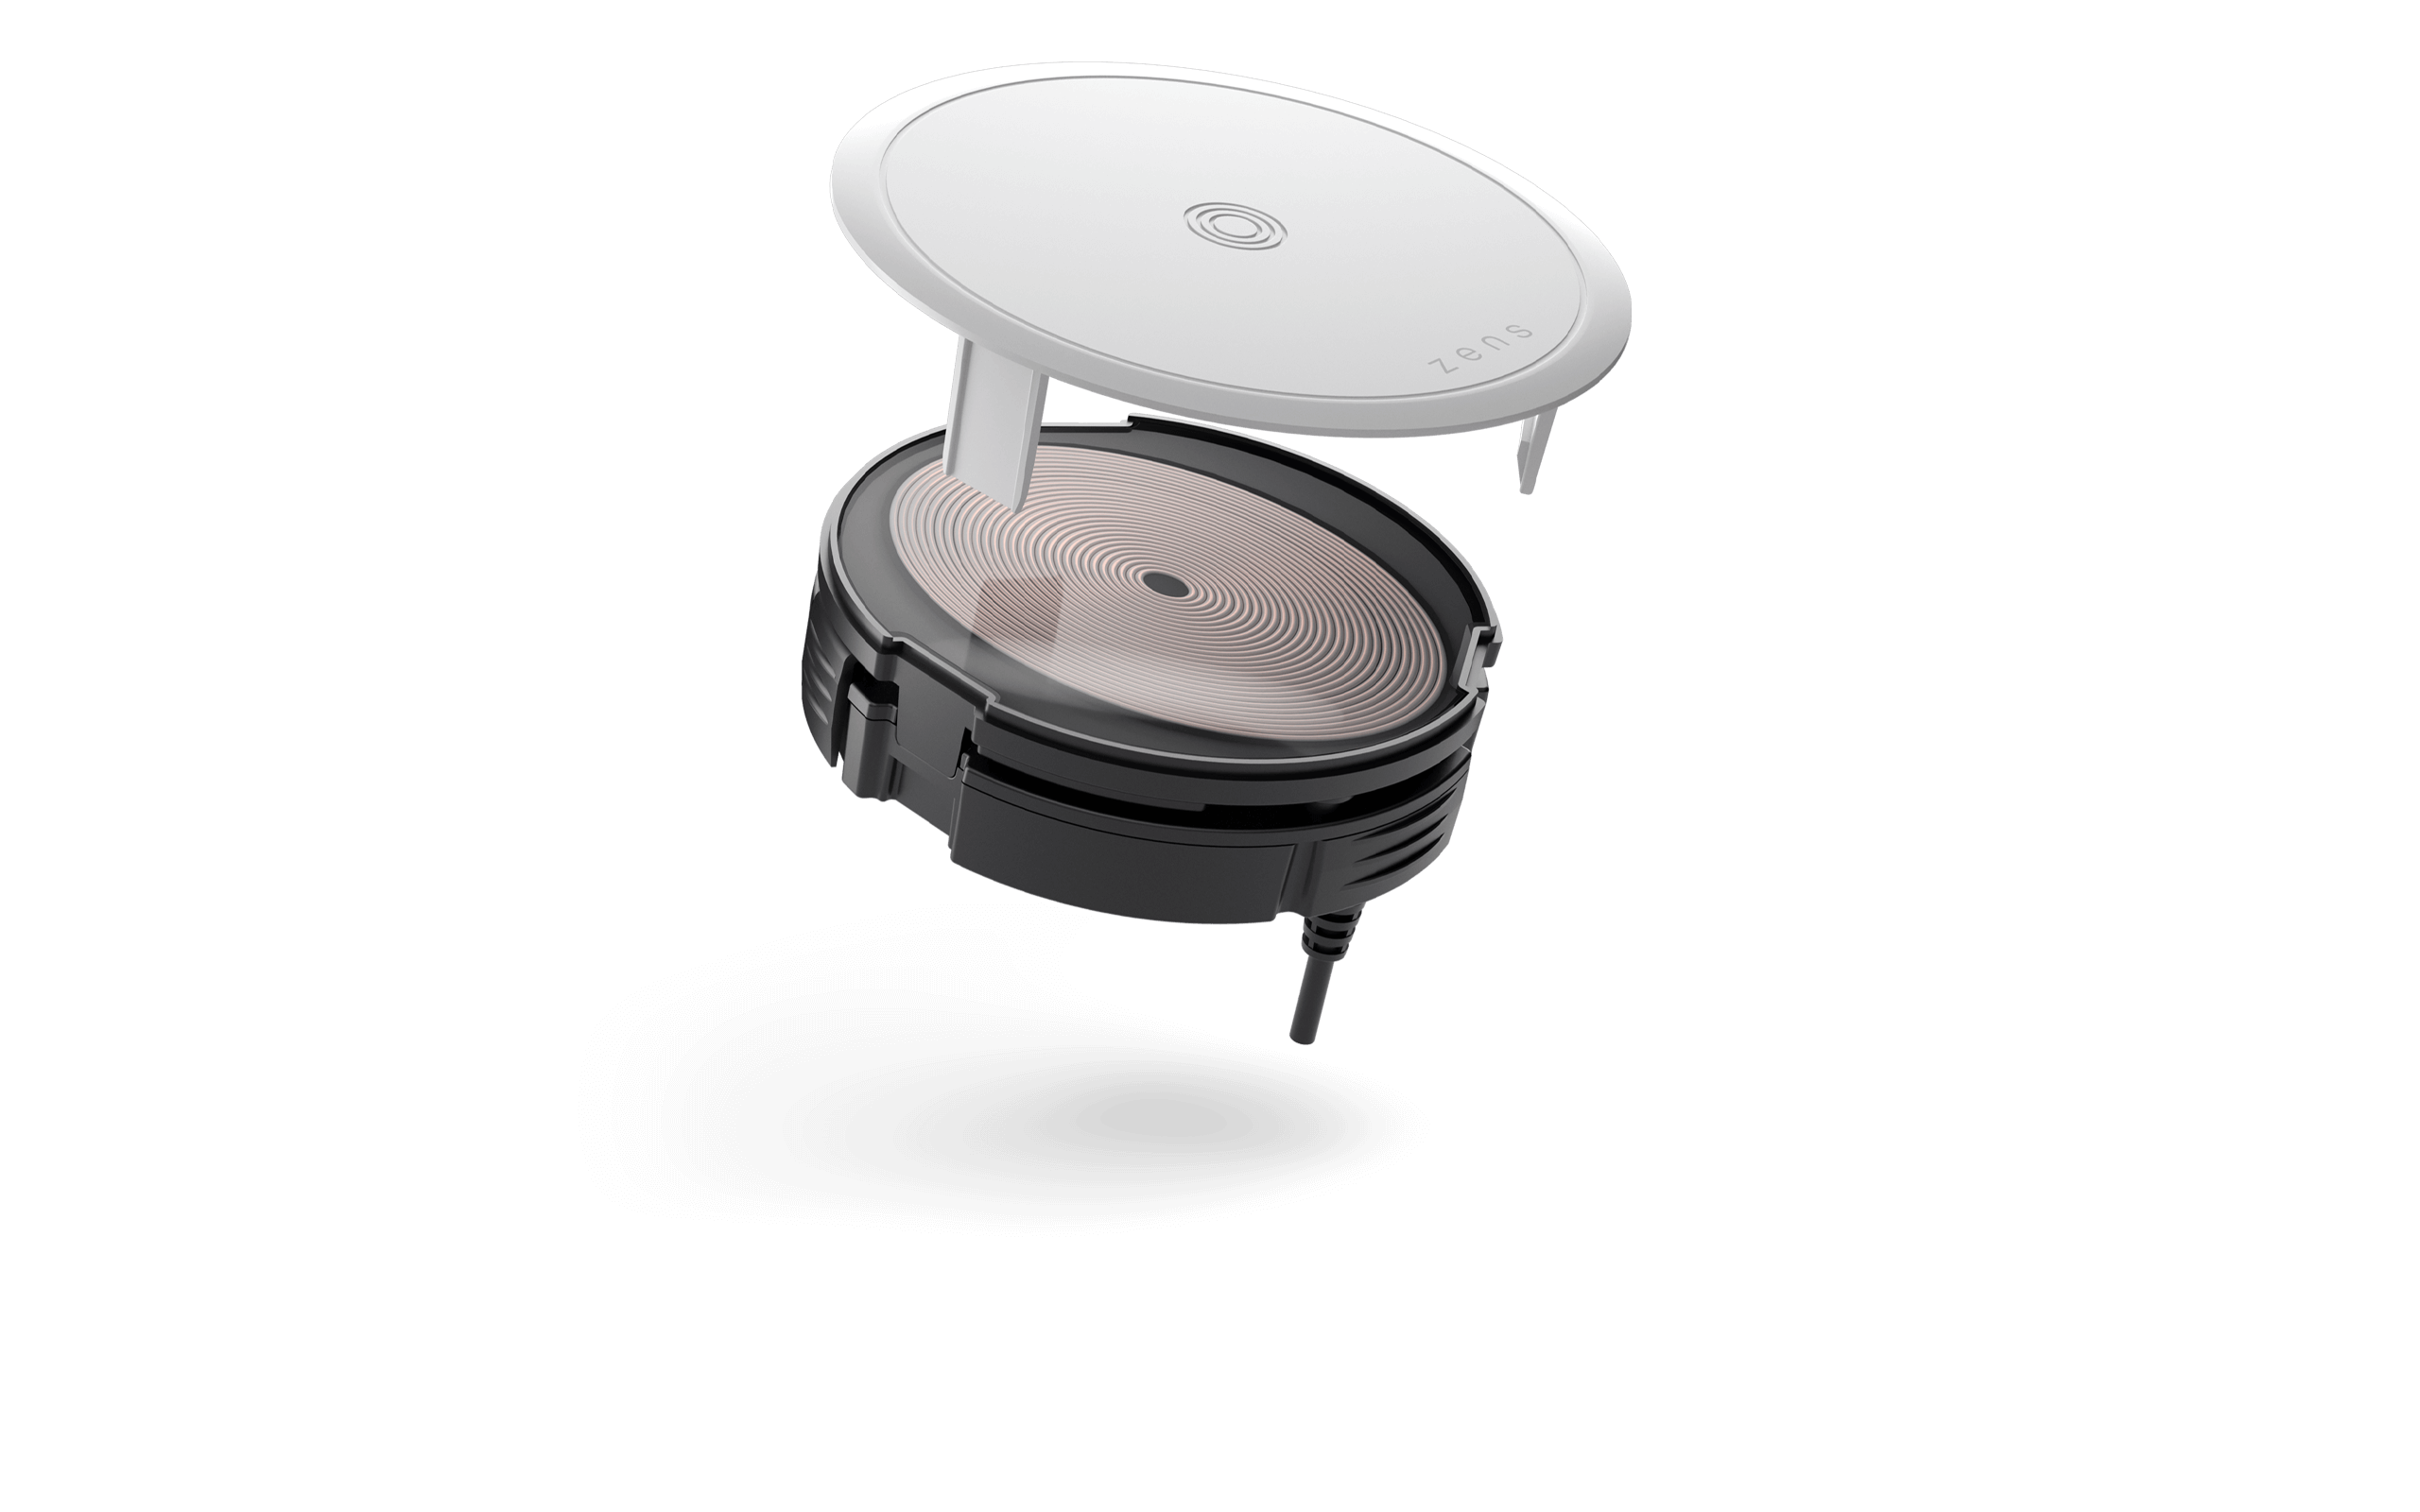 PuK Base 2 Built-in Wireless Surface Charger